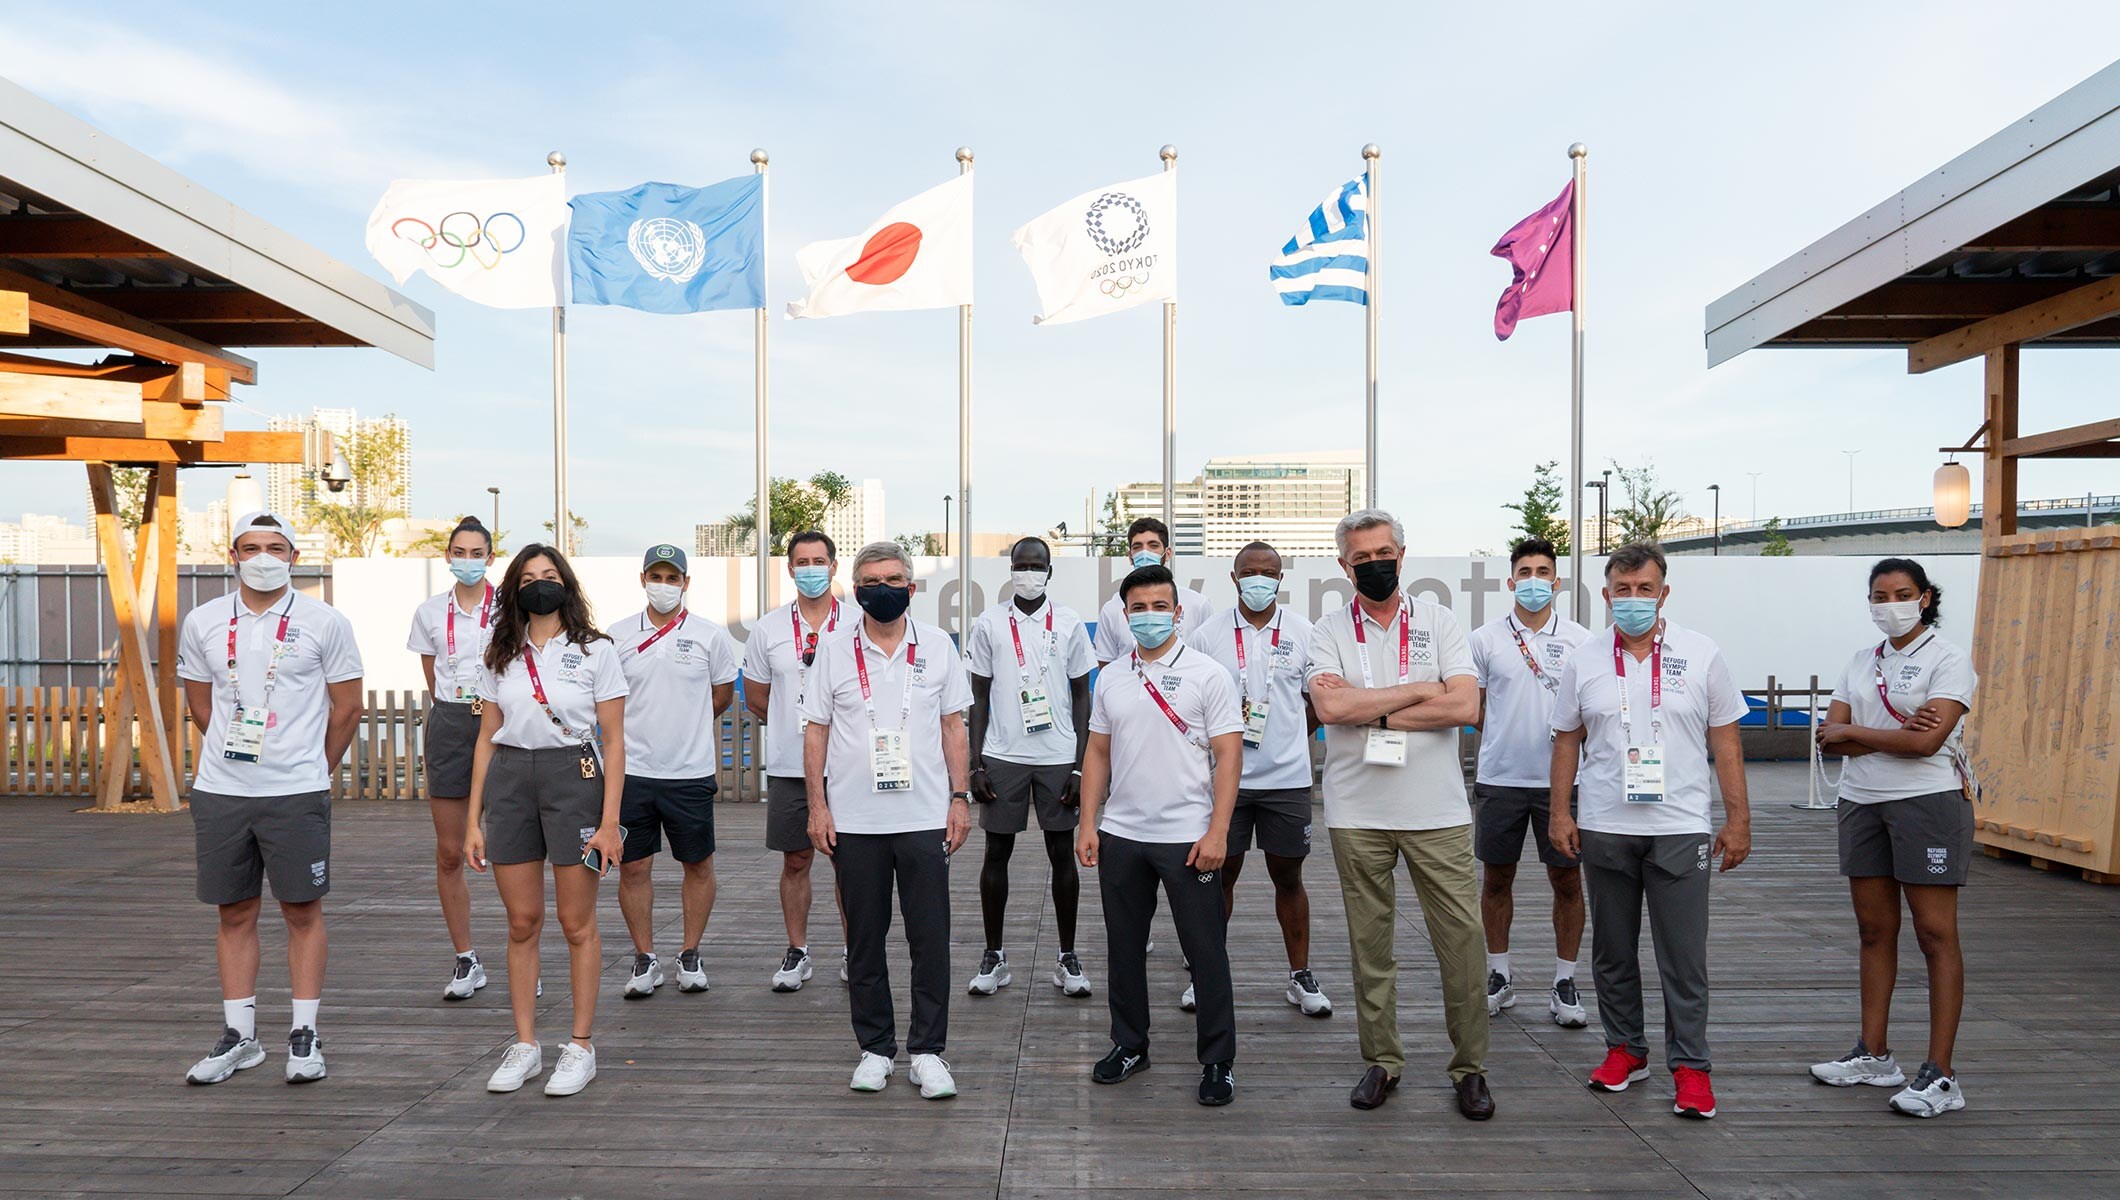 Members of the Olympic Refugee Team at the Olympic Village in Tokyo